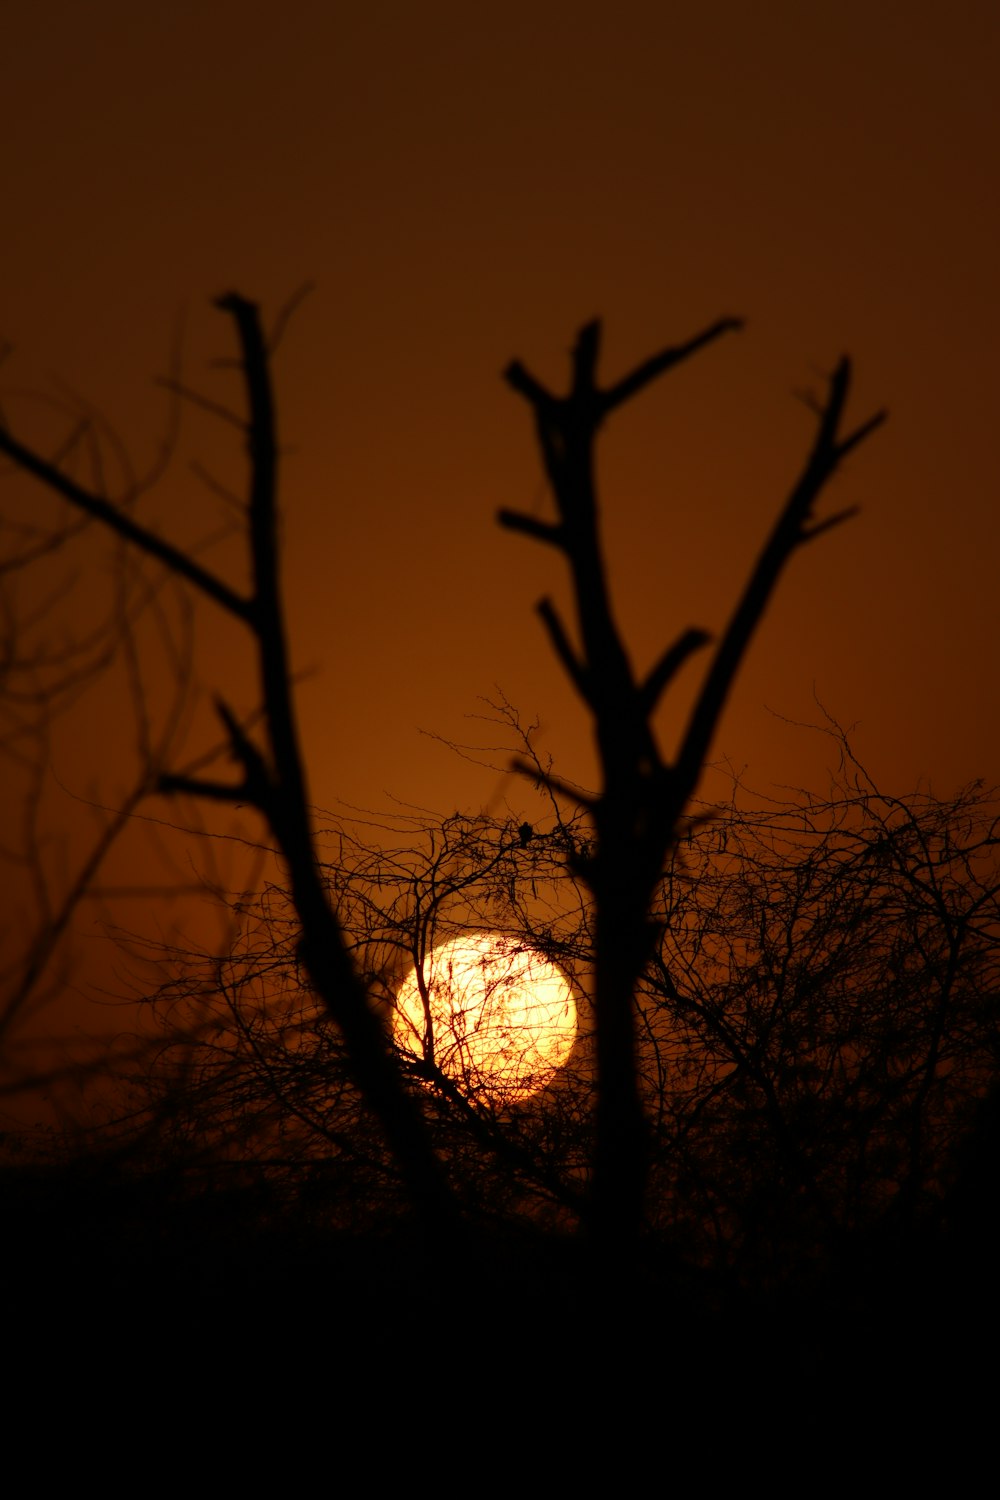 the sun is setting behind a tree with no leaves